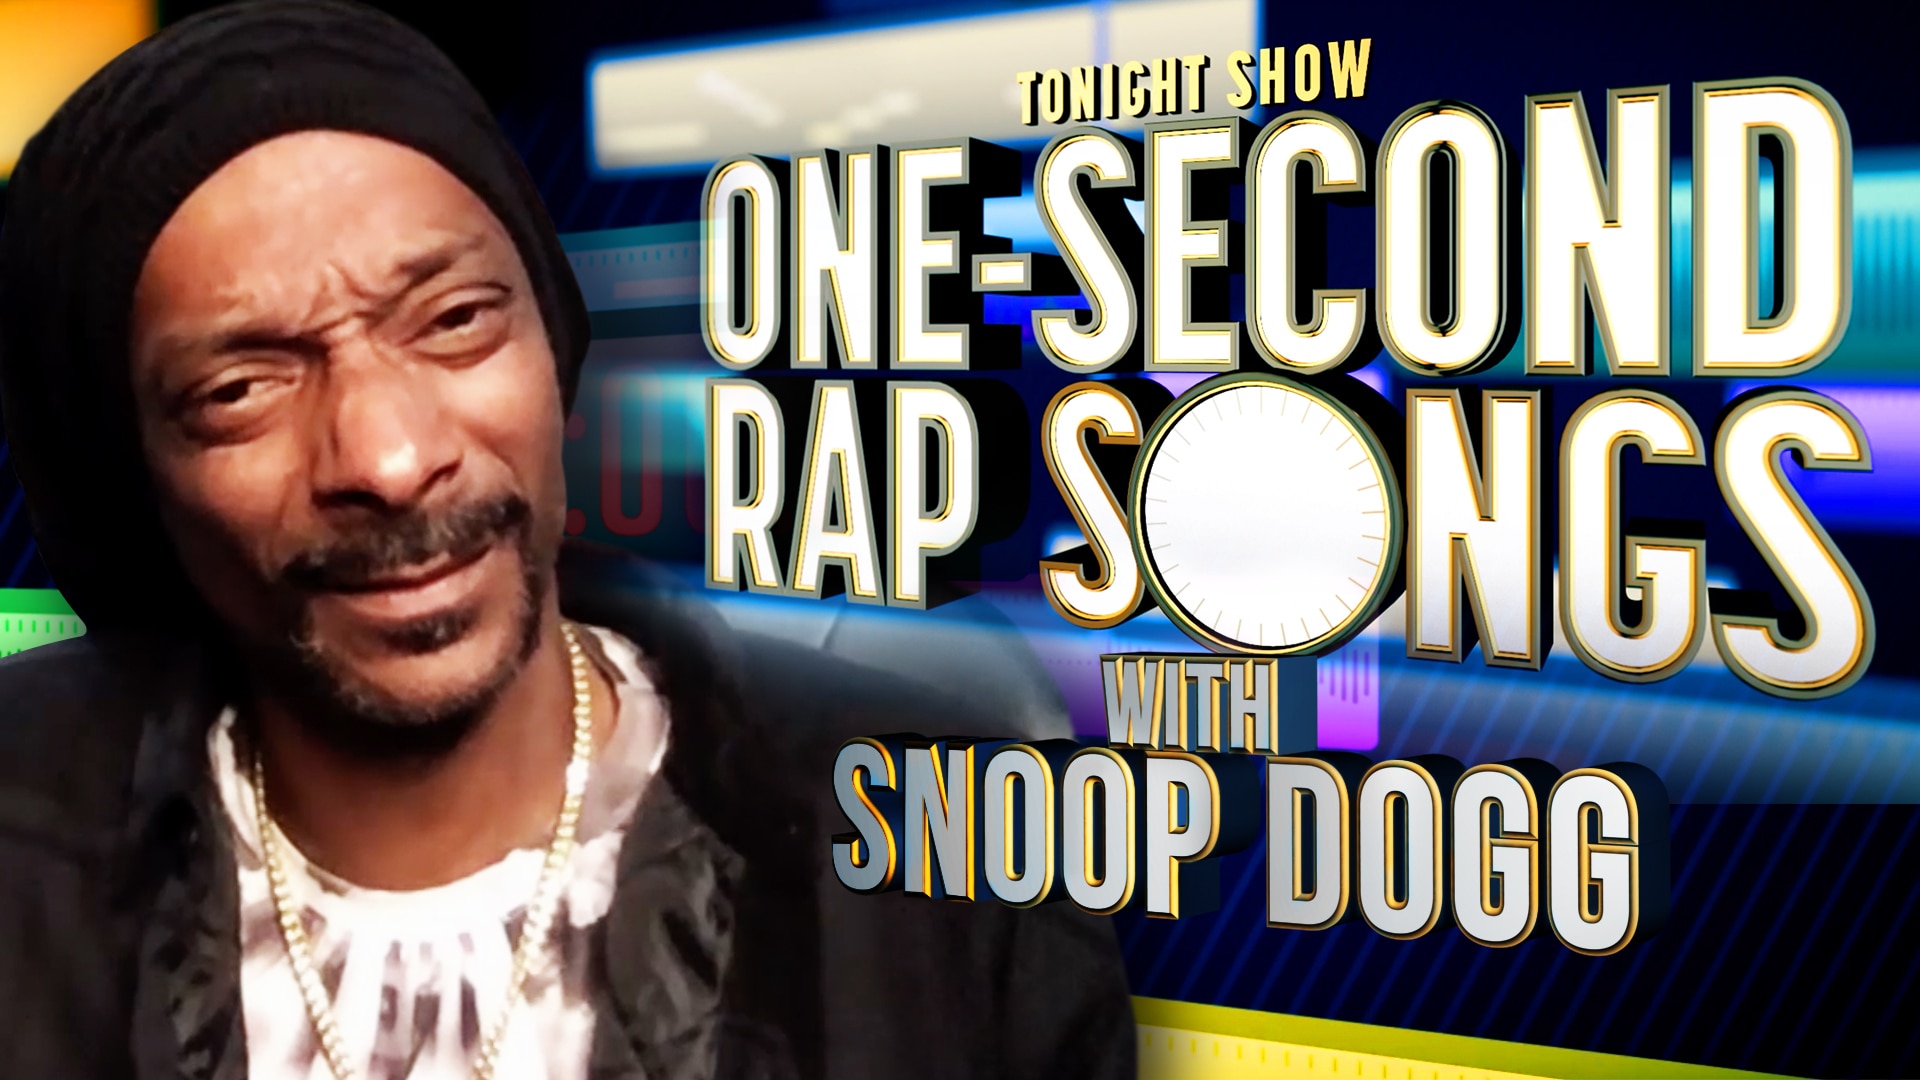 Watch The Tonight Show Starring Jimmy Fallon Highlight OneSecond Rap